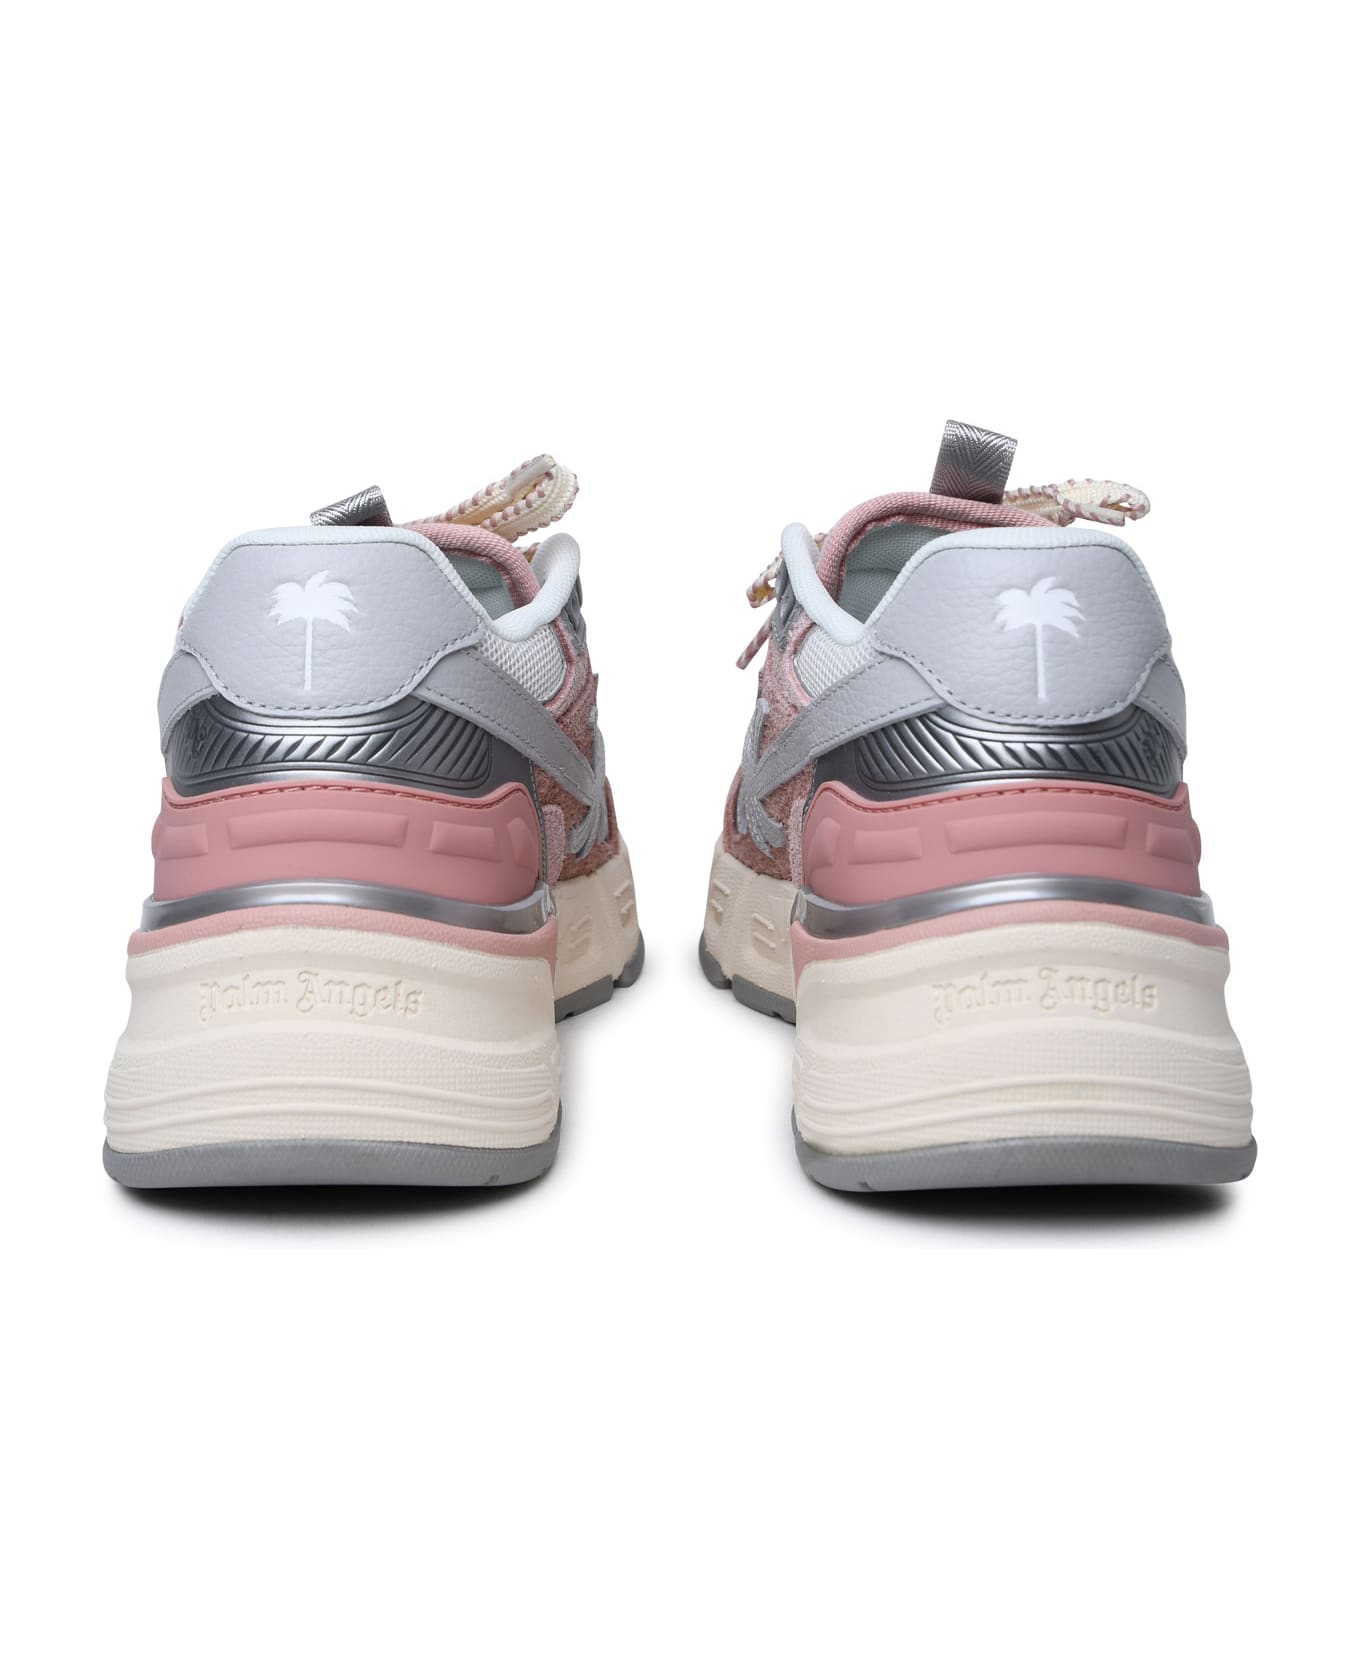 Palm Angels 'pa 4' Pink Leather Blend Sneakers - Pink